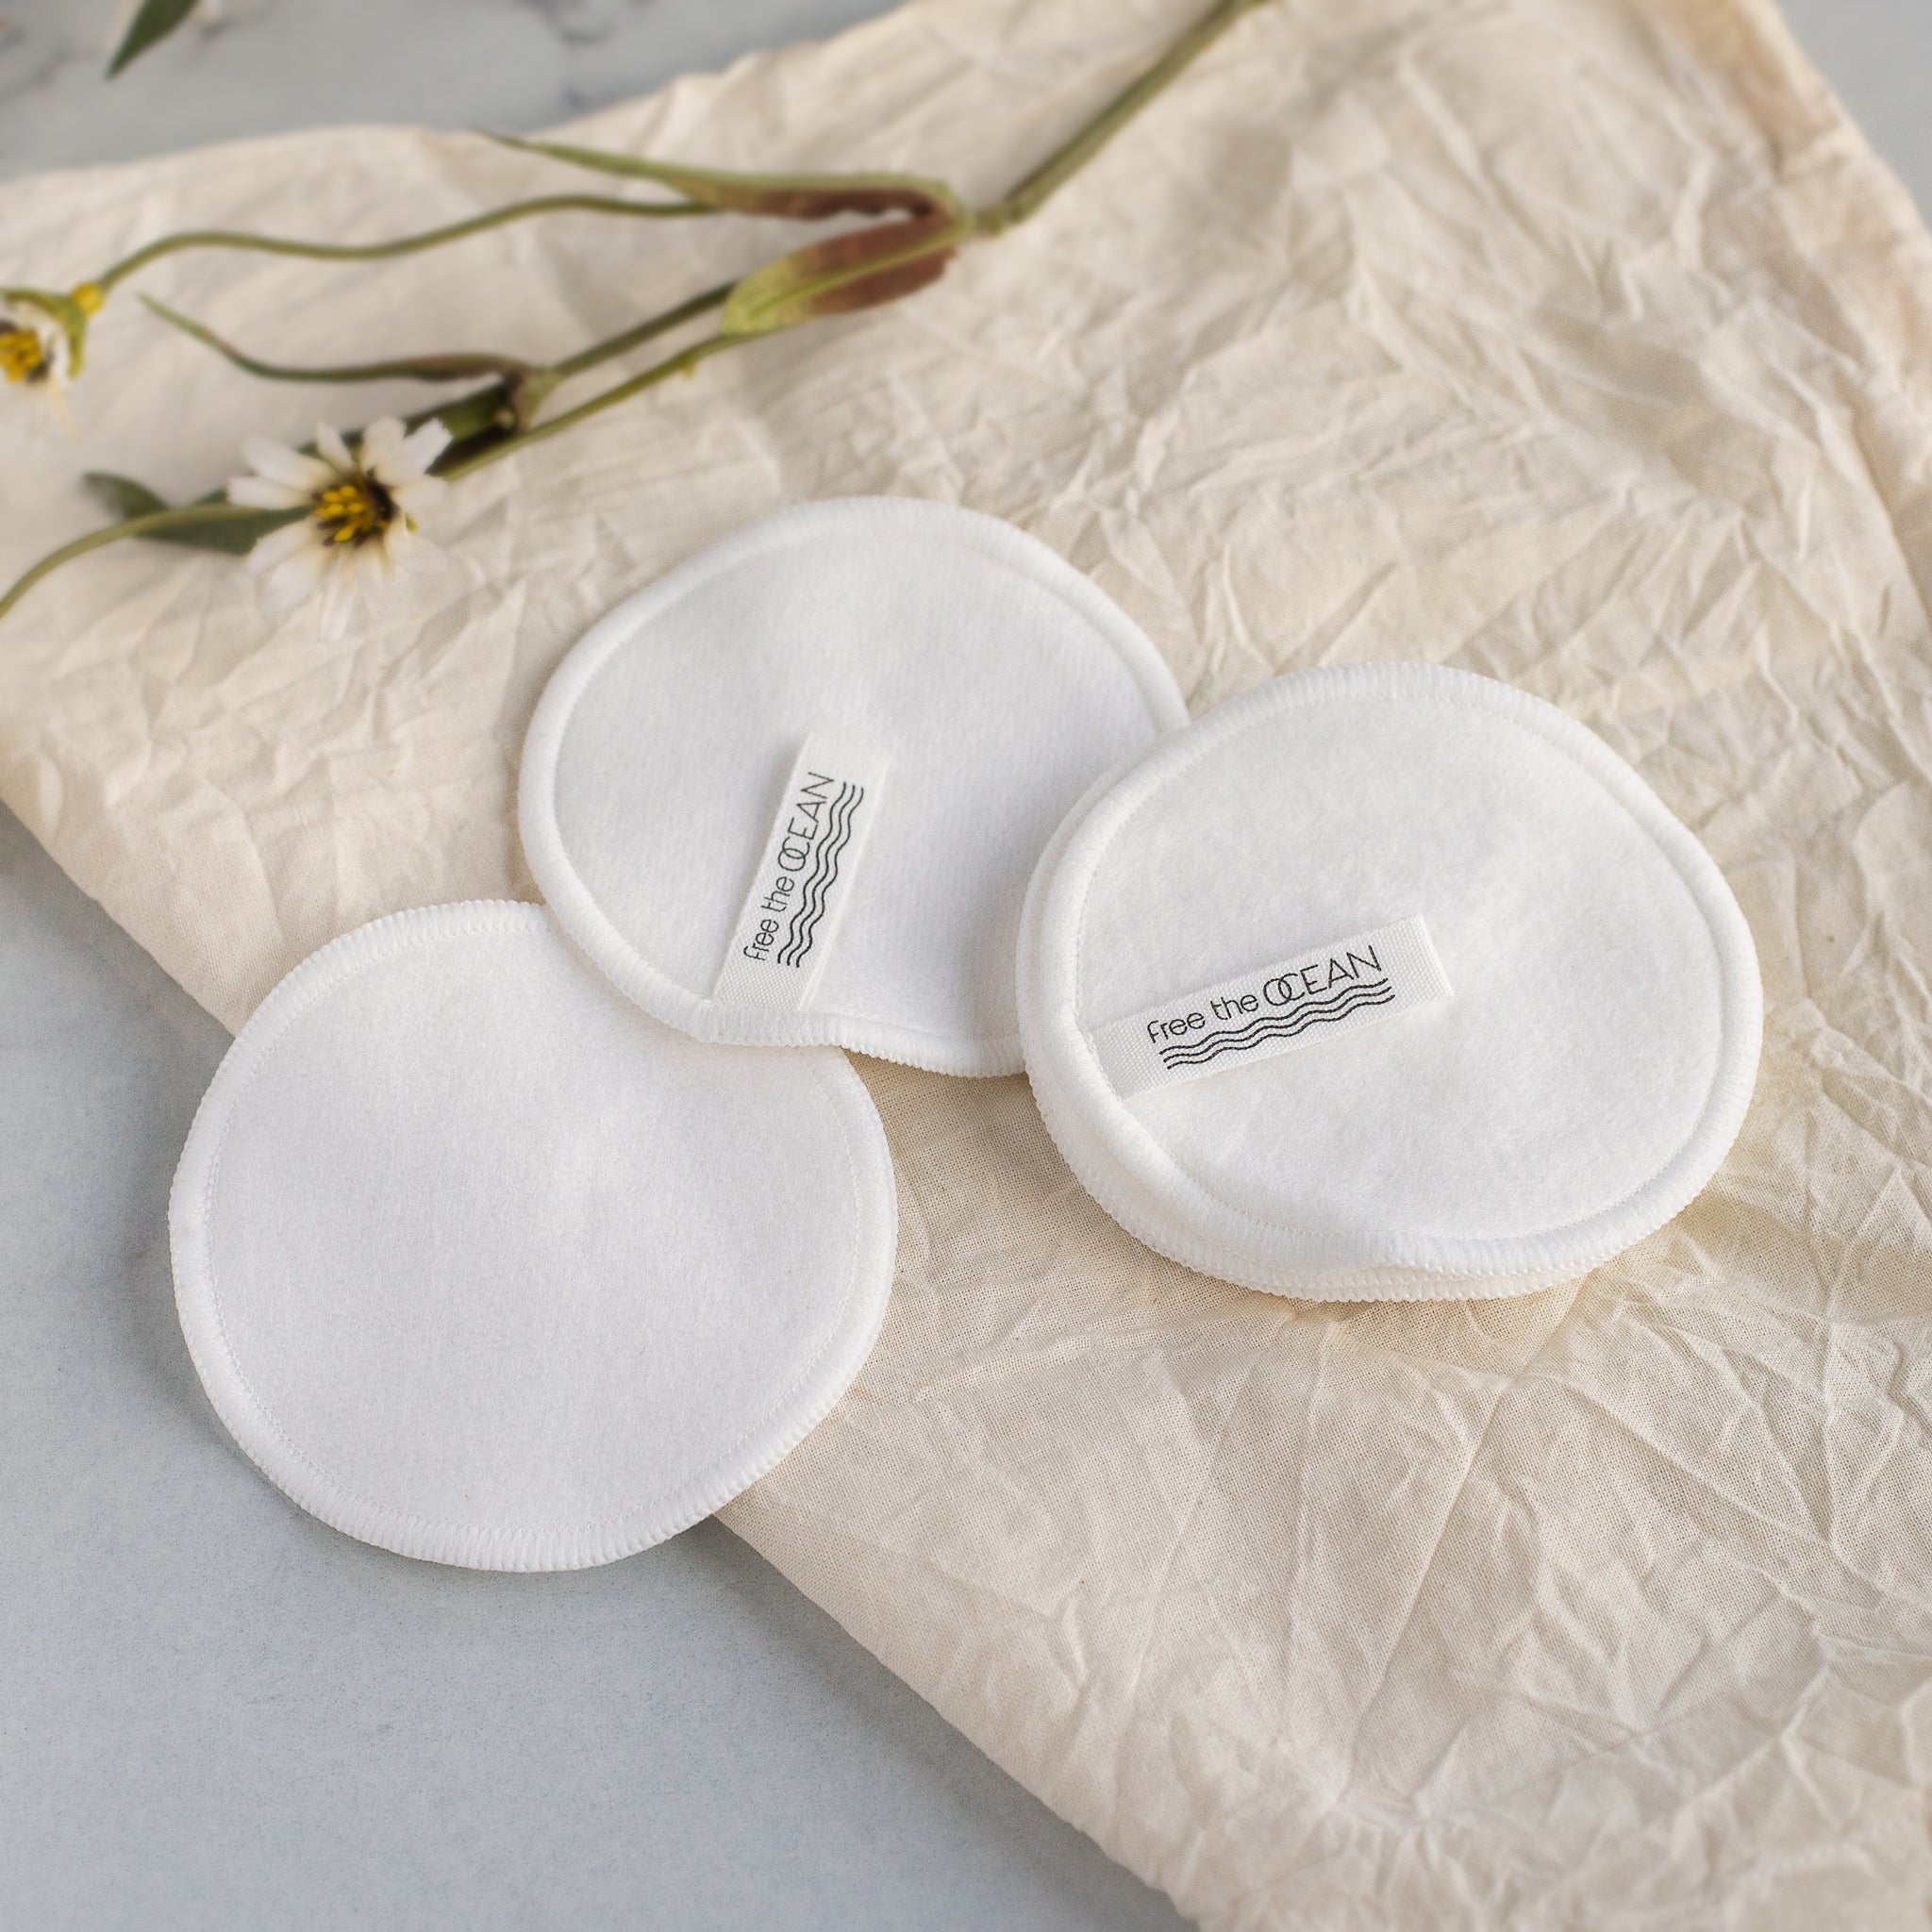 Reusable Makeup Remover Pads | Free The Ocean | Free the